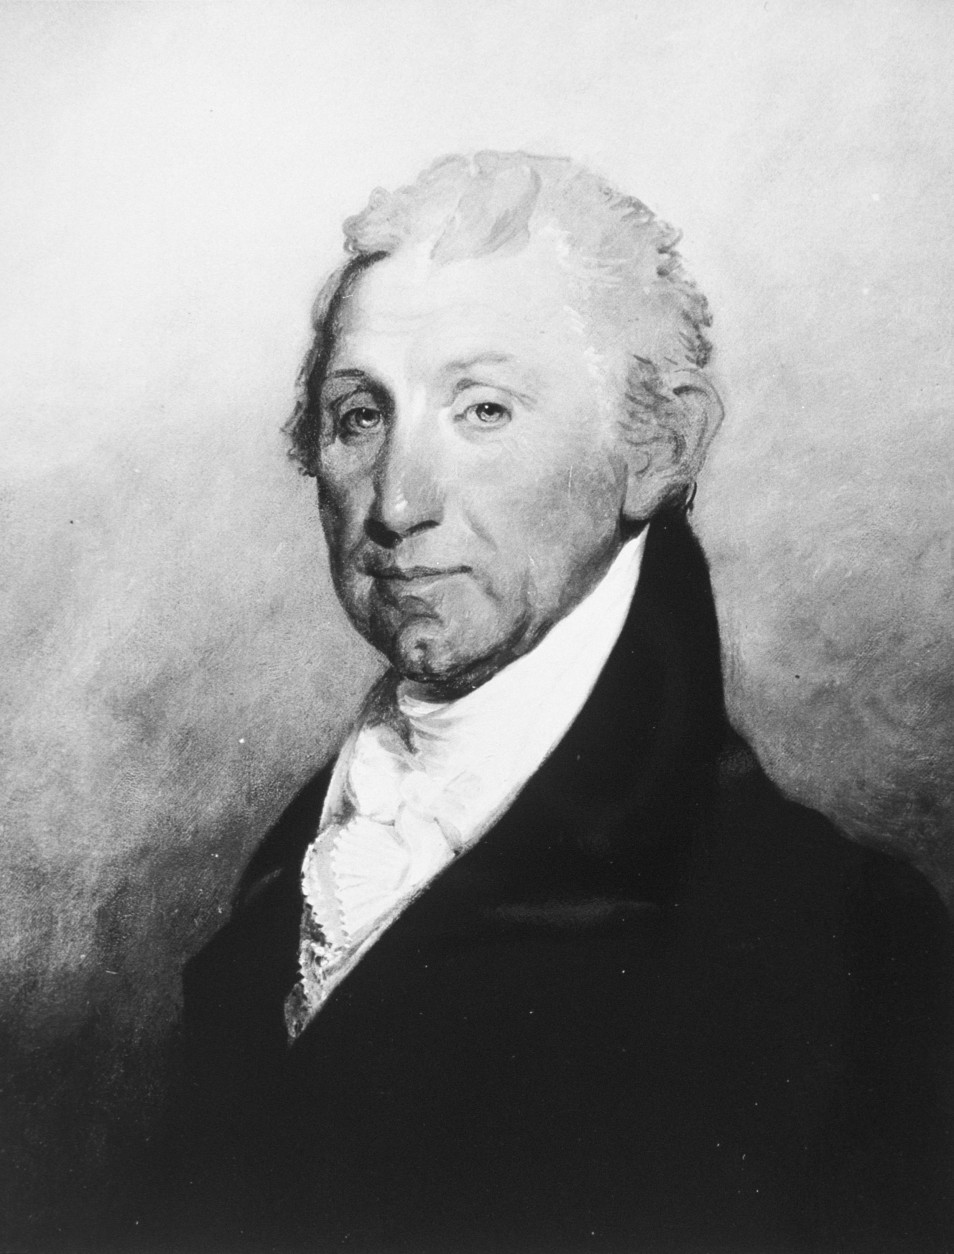 <p><strong>James “Landslide” Monroe (1817—1825)</strong></p>
<p>His presidency came during what was called the &#8220;Era of Good Feelings.&#8221; He had to have been happy about it: In 1816, he won 16 of 19 states and 183 out of 217 Electoral College votes. In 1820, he won all 24 states (yup, the U.S. gained five states in four years), and only one electoral vote was cast against him. How many electoral votes he got is complicated; there were disputes over how many votes some states got. But because it was a blowout, they evidently never really bothered to resolve them.</p>
